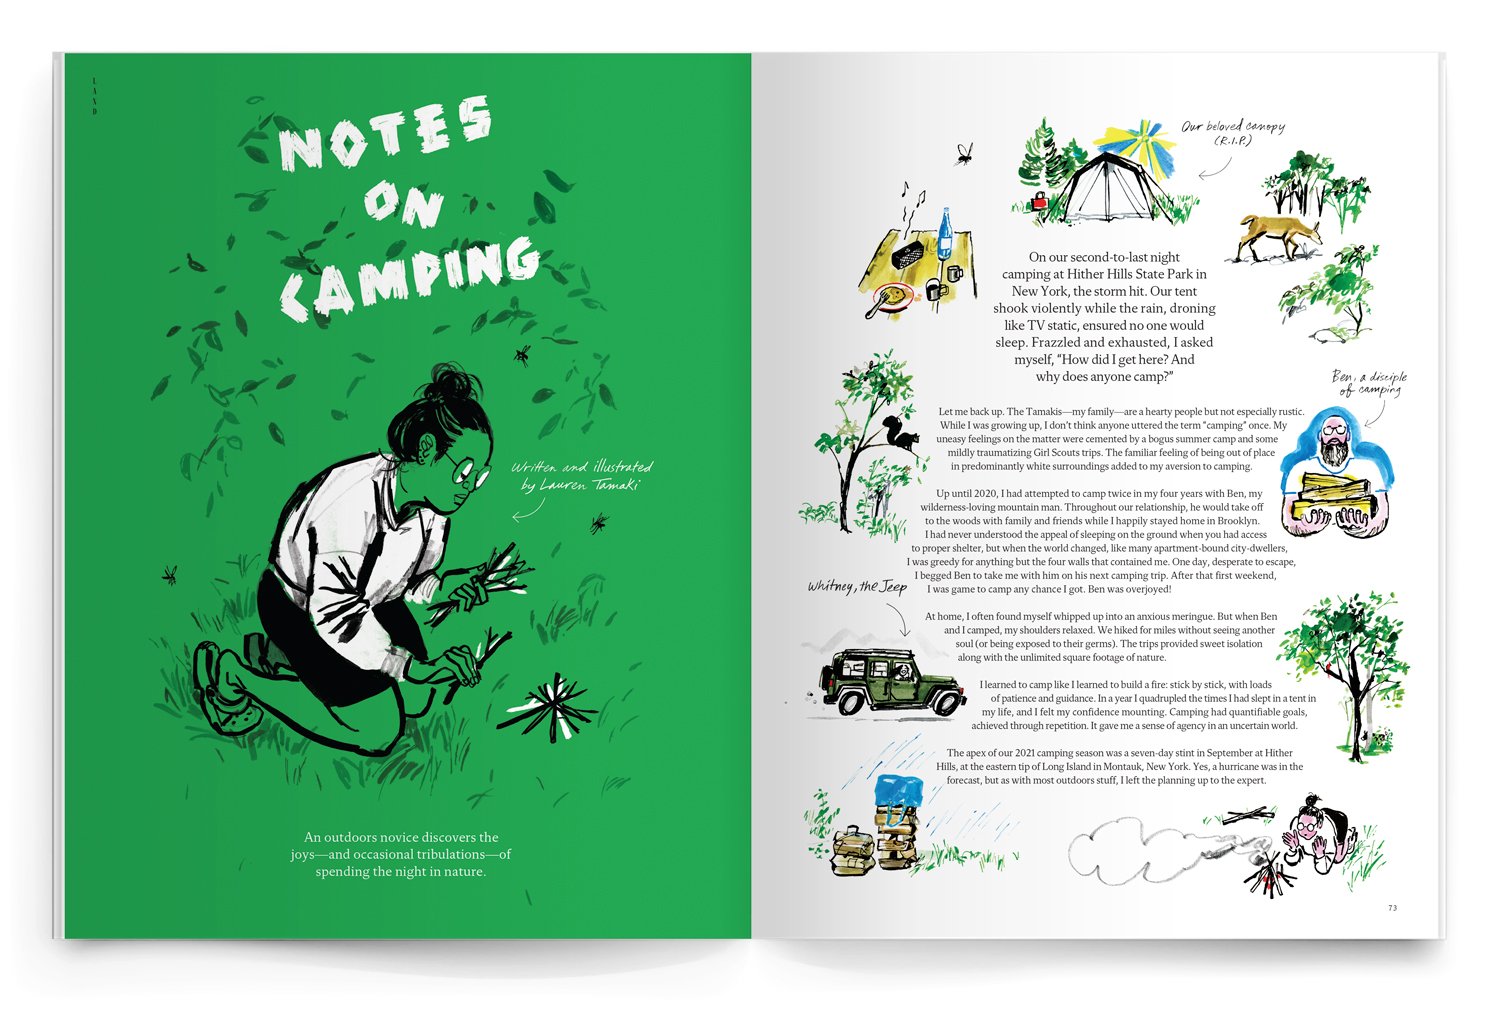 Notes on Camping / Art and Story by Lauren Tamaki